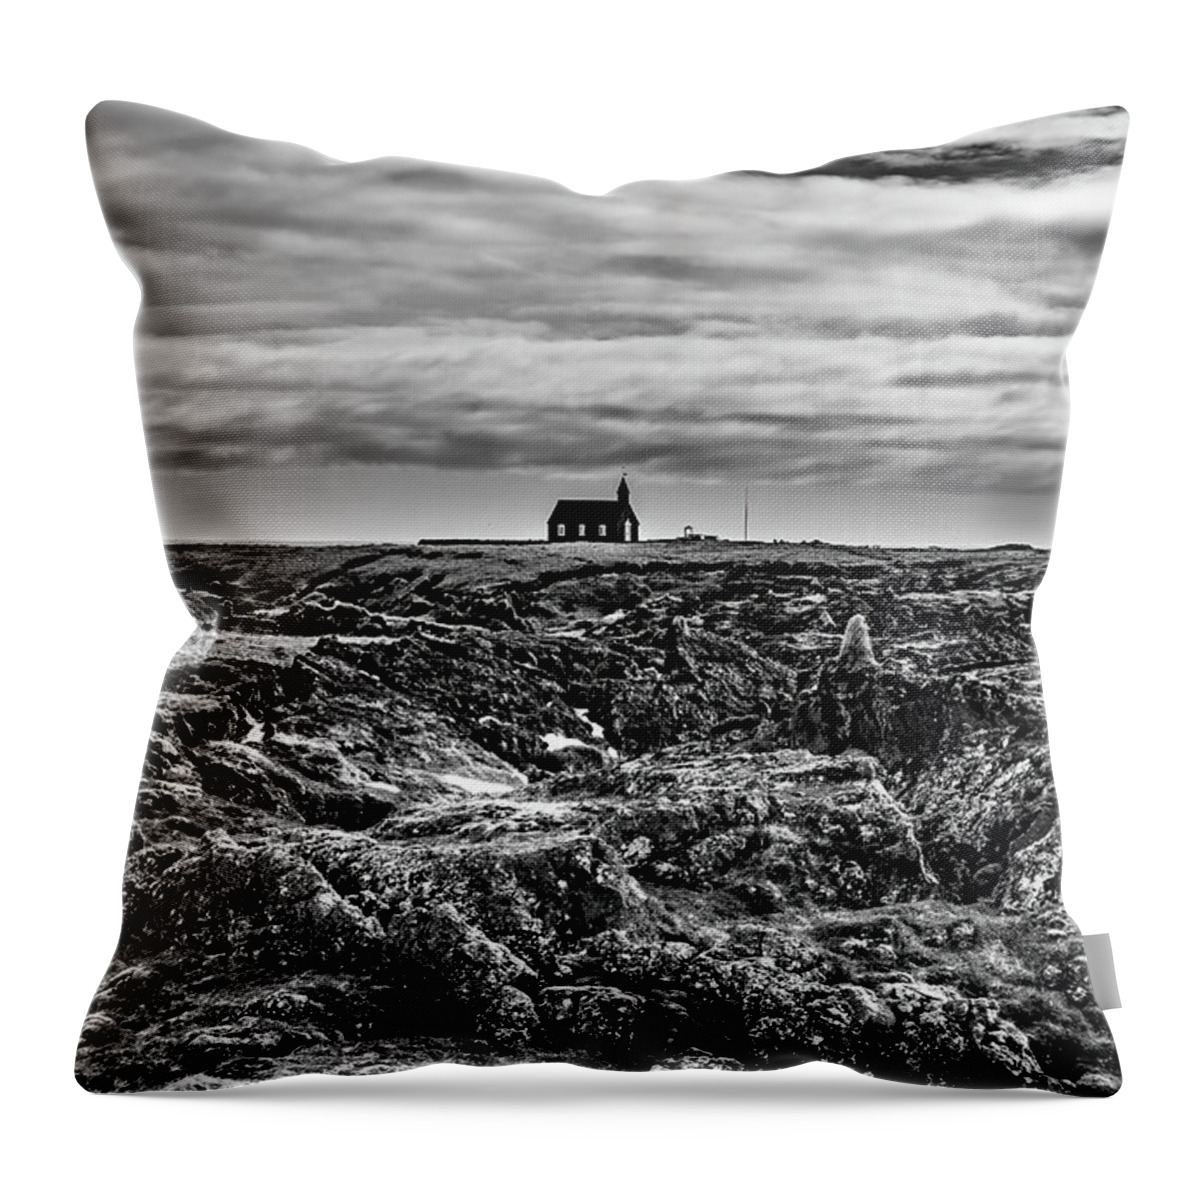 Isolated Throw Pillow featuring the photograph Budir, Monochrome by Arthur Oleary